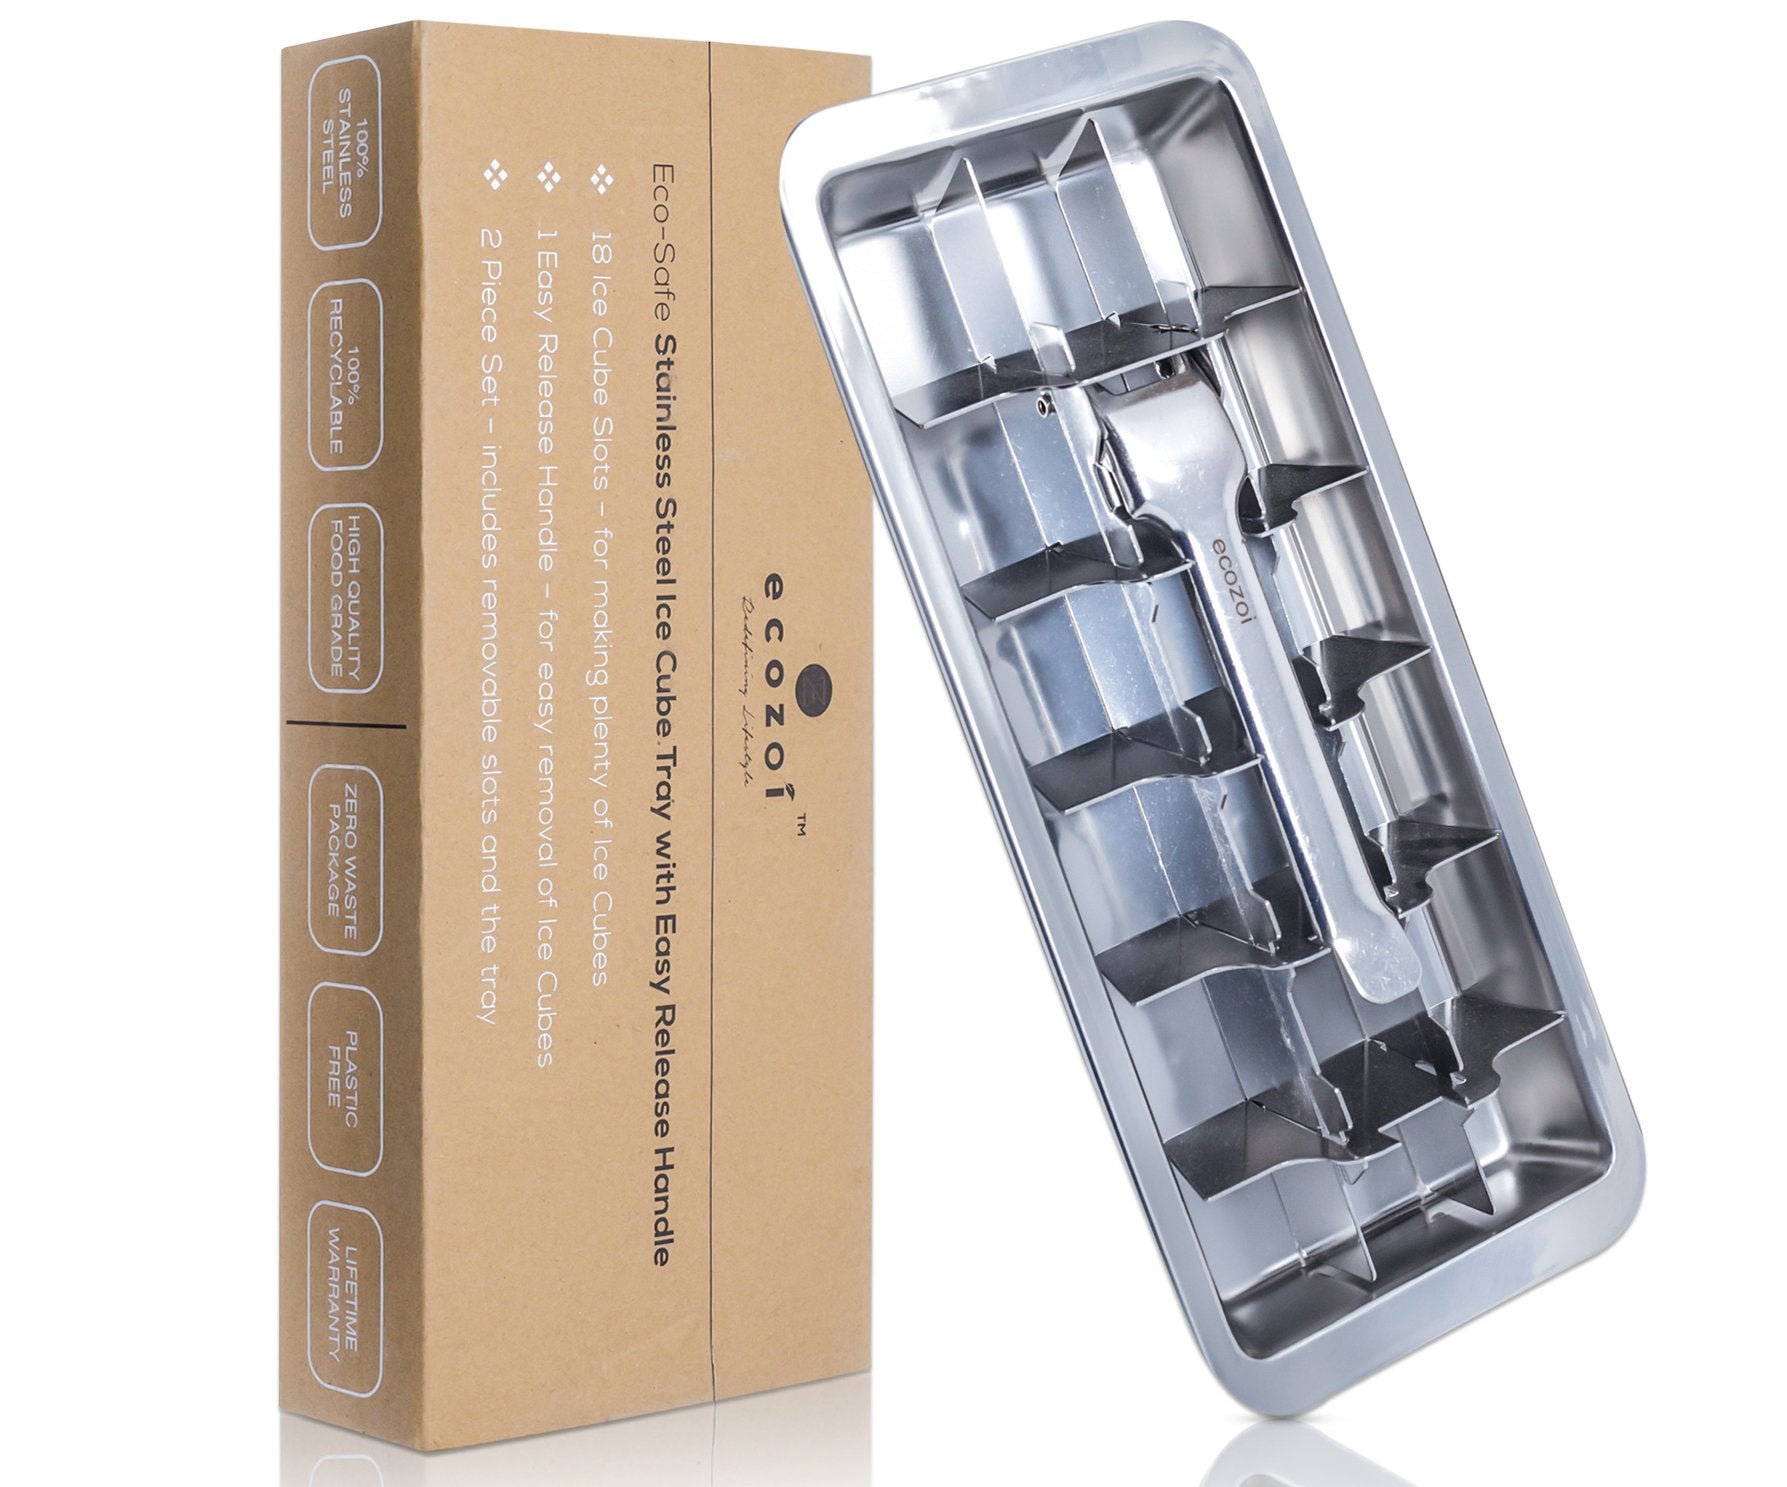 This Stainless Steel Ice Cube Tray with a lever handle is a